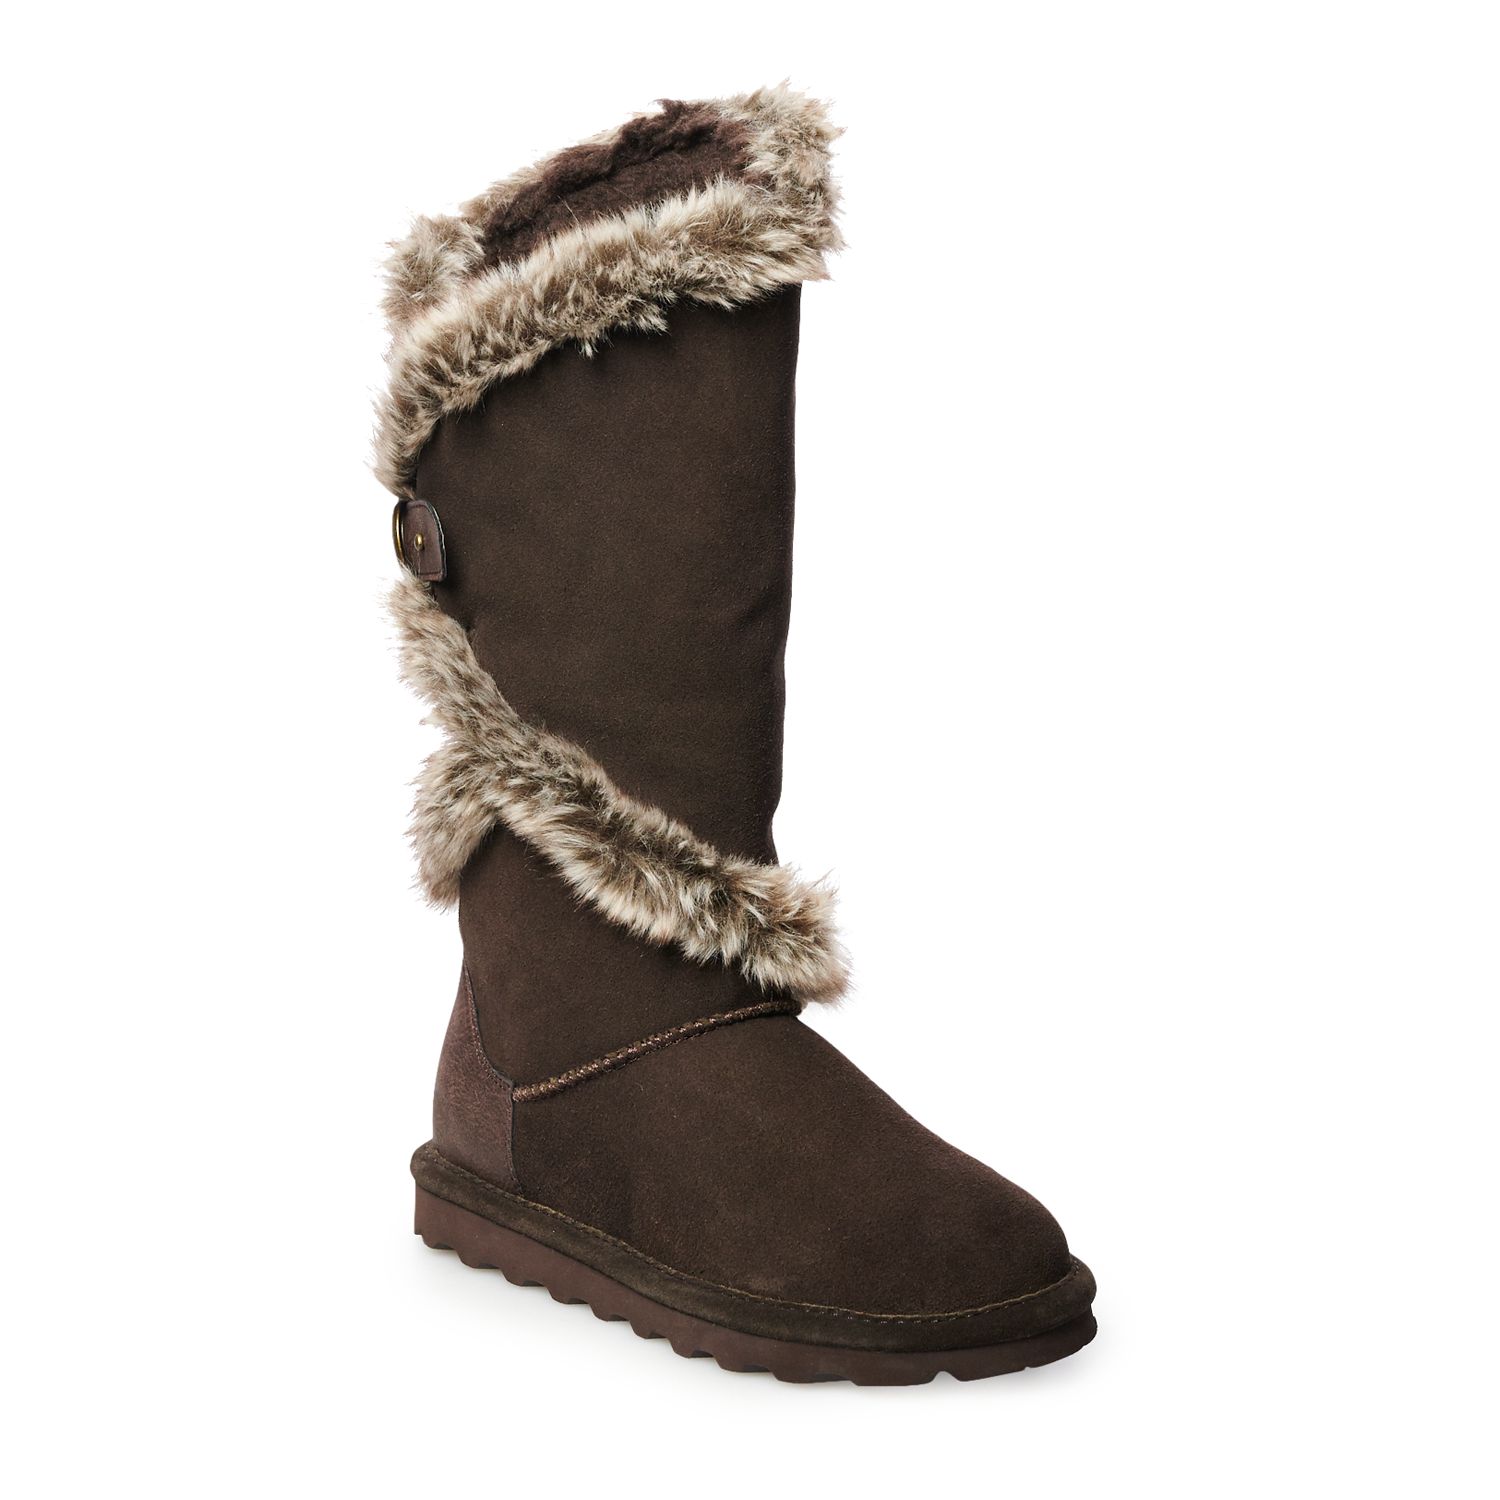 knee high winter boots with fur